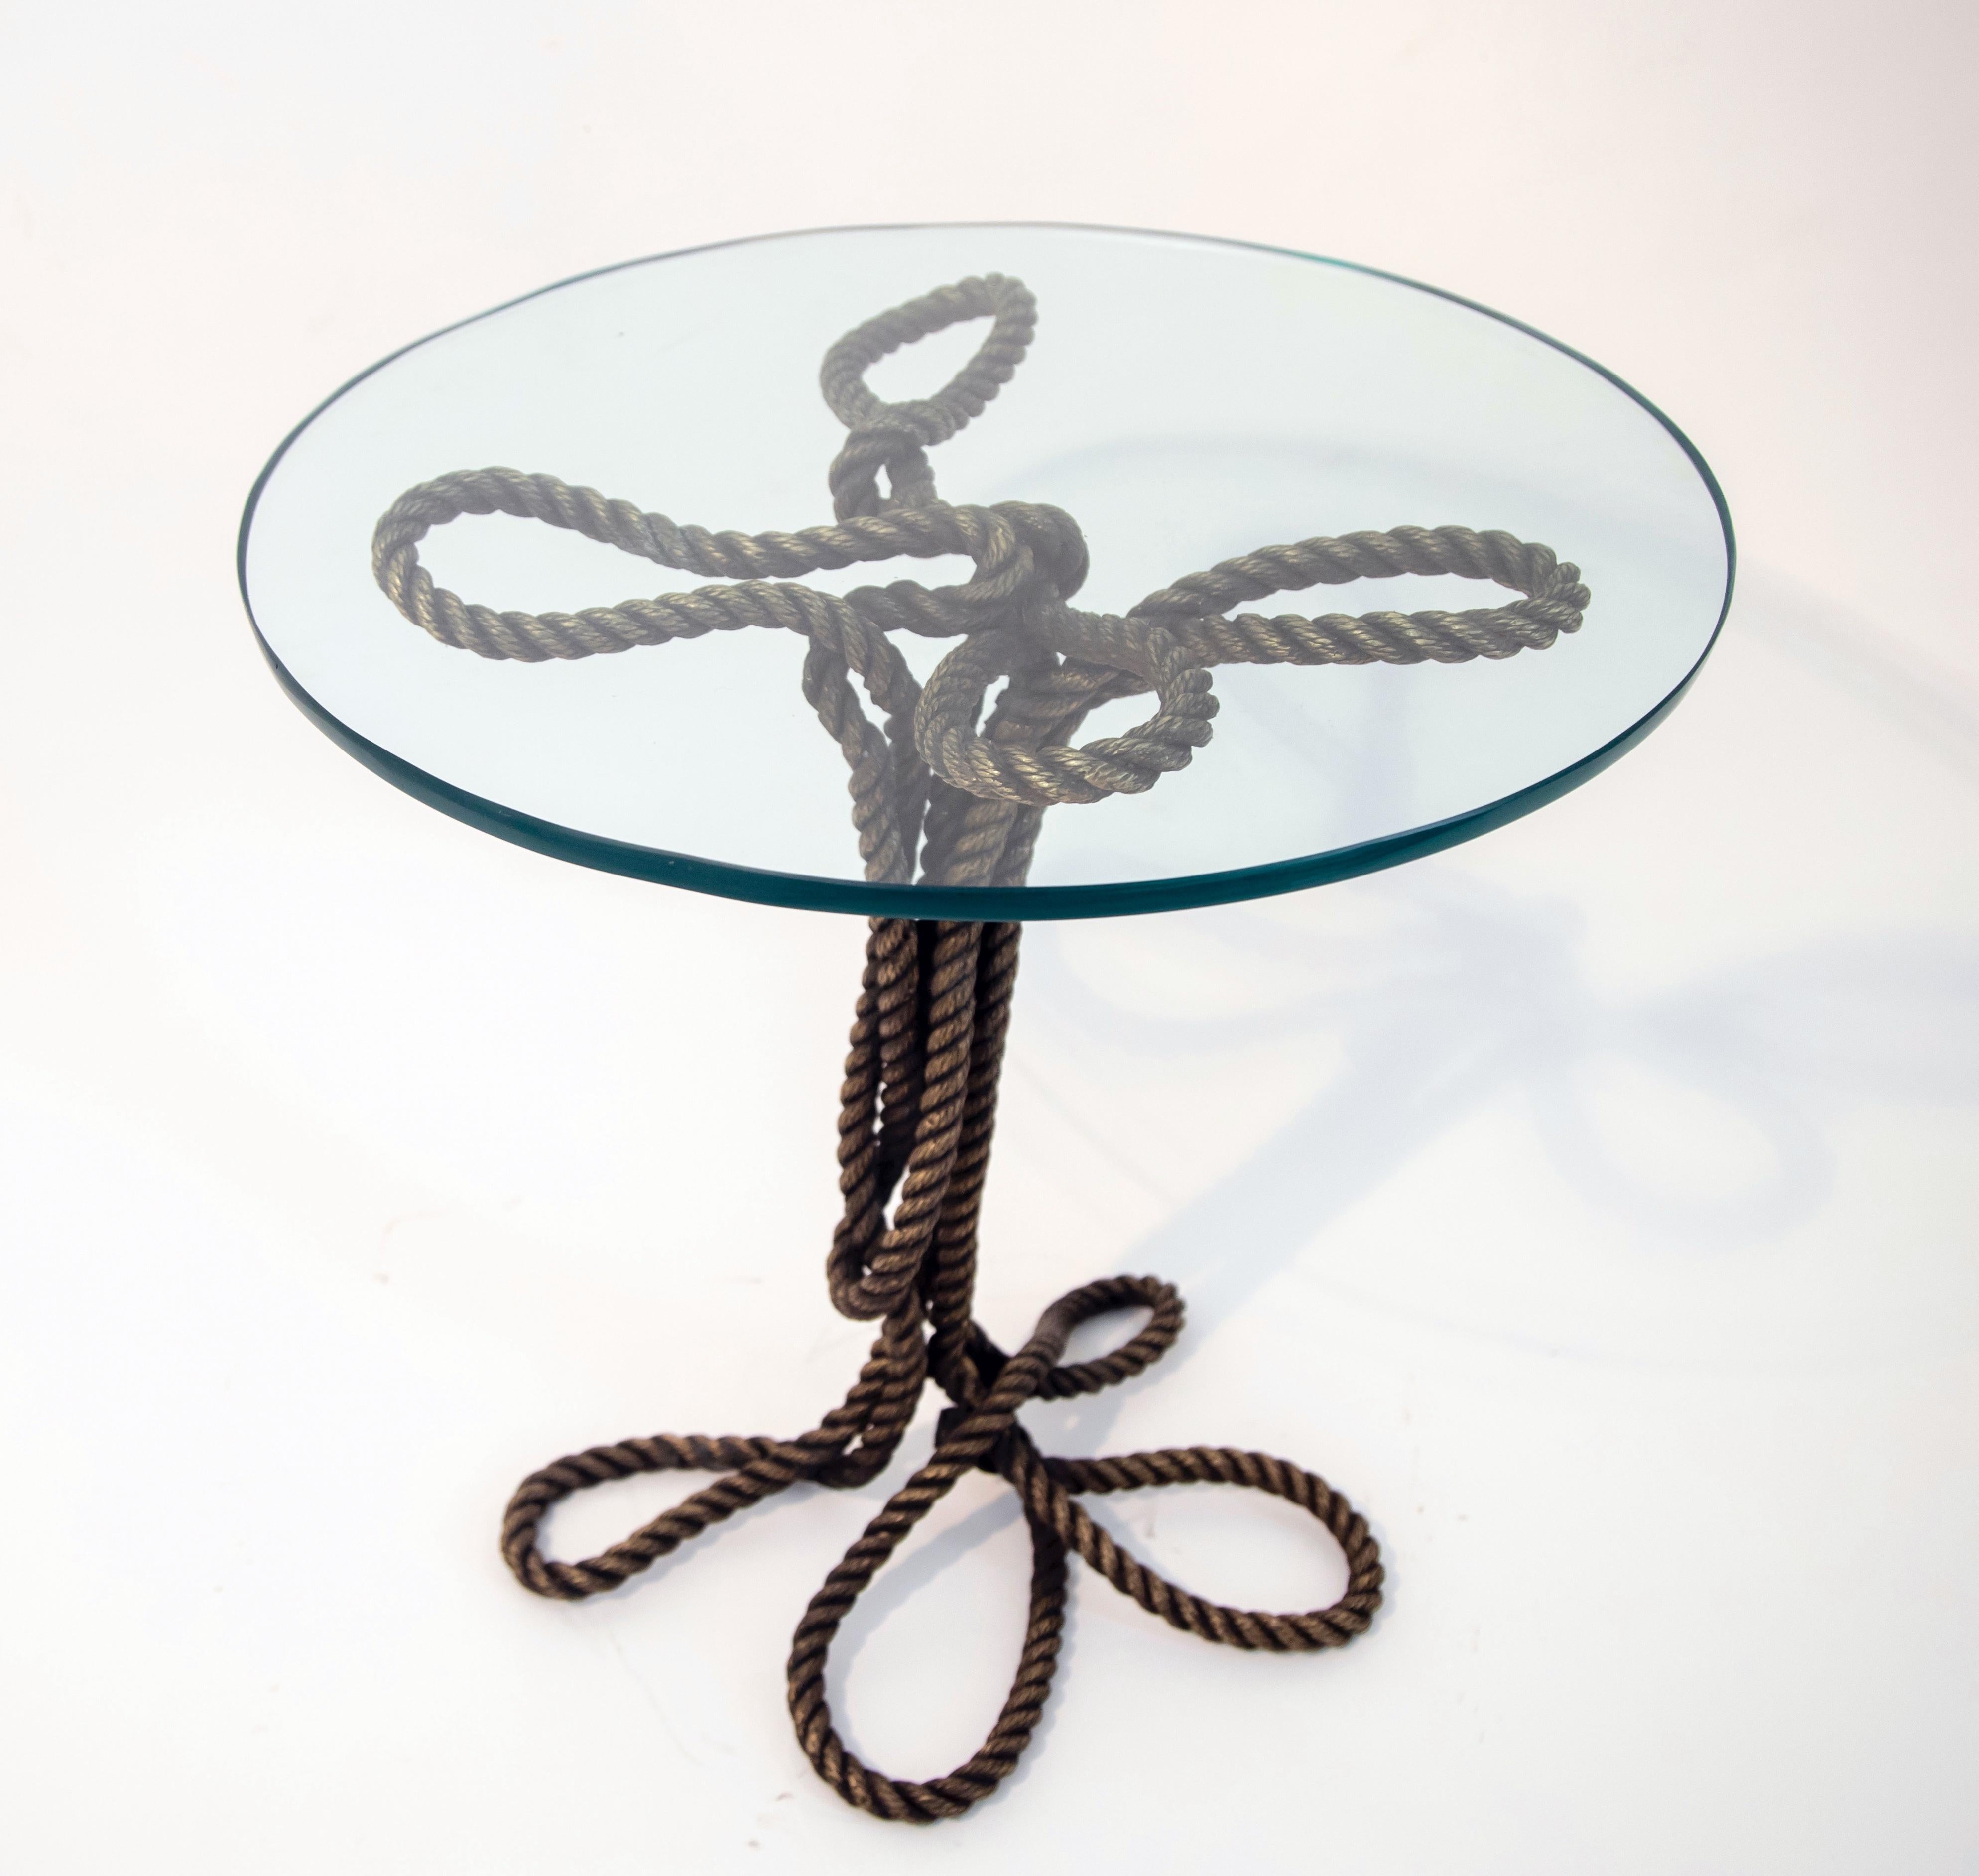 Casted bronze twisted rope legs with 50cm round 15mm thick tempered glass top.
There is currently 1 in stock.